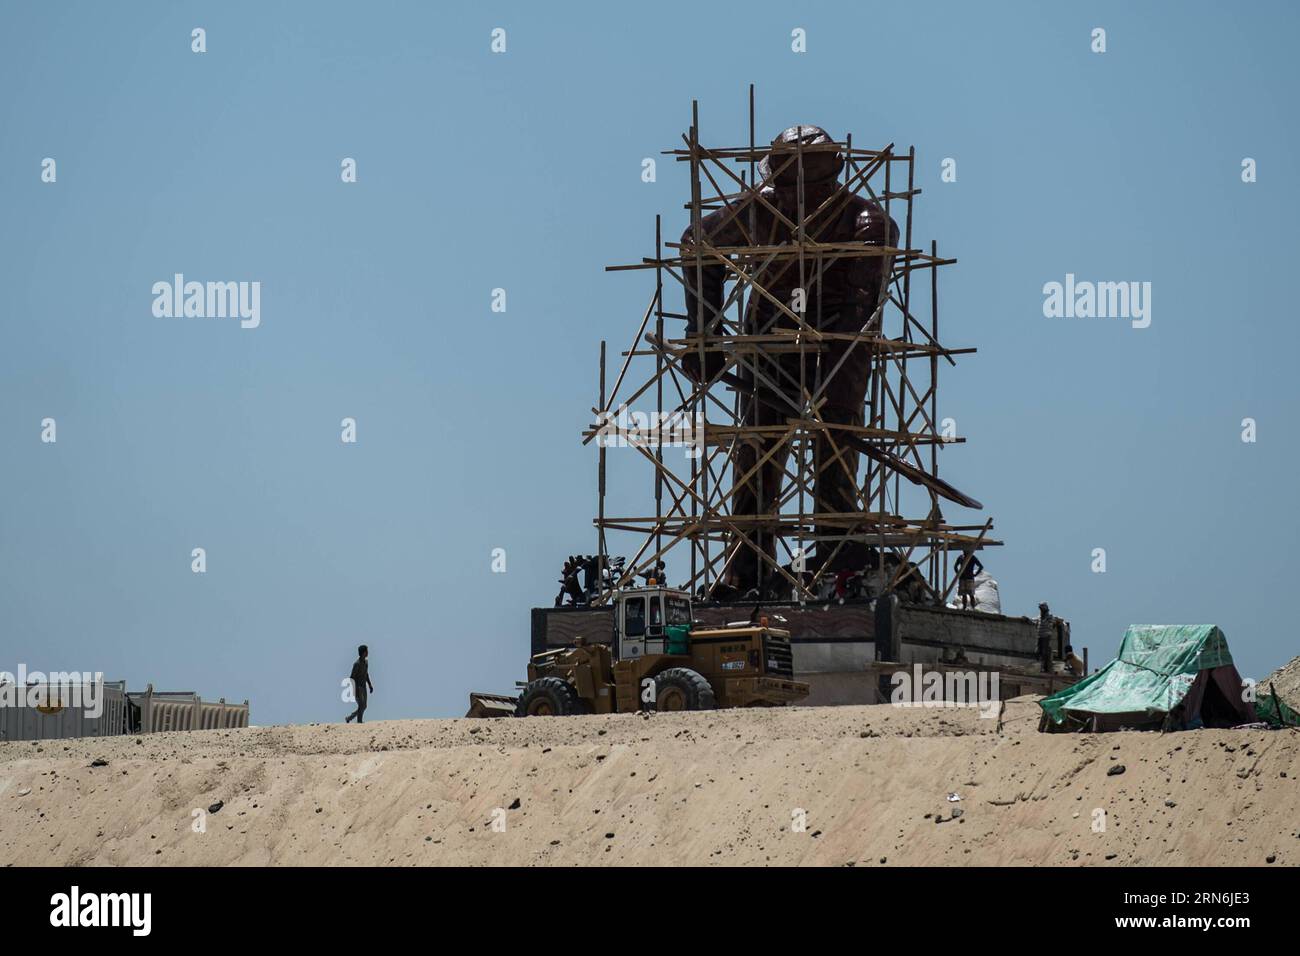 WIRTSCHAFT Ägypten: Neuer Suezkanal fertig gestellt (150729) -- ISMAILIA, July 29, 2015 -- Workers are seen on the construction site of the new Suez Canal in Ismailia, a port city in Egypt, on July 29, 2015. The dredging work of Egypt s New Suez Canal has been completed and the waterway is ready as well as safe for huge ship navigation, Mohab Memish, head of the Suez Canal Authority (SCA), told reporters in a press conference Wednesday. ) EGYPT-ISMAILIA-NEW SUEZ CANAL PanxChaoyue PUBLICATIONxNOTxINxCHN   Economy Egypt later Suez Canal ready asked 150729 Ismailia July 29 2015 Workers are Lakes Stock Photo